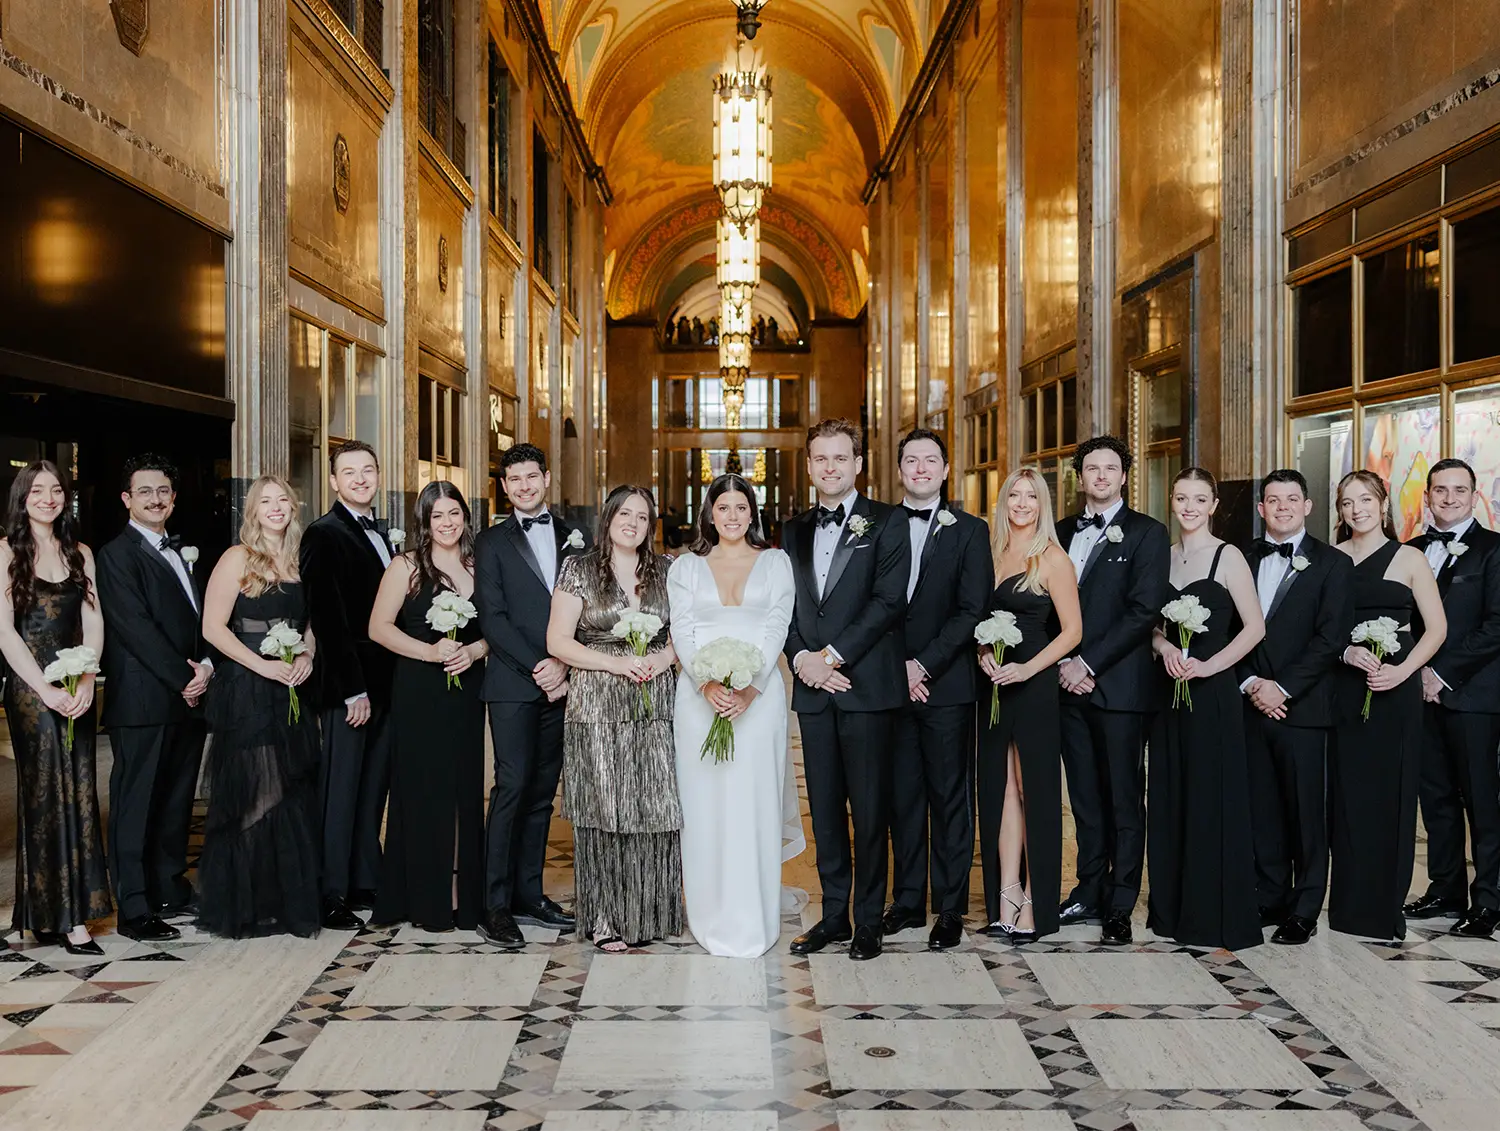 Eliza and Daniel posing with bridesmaids and groomsmen